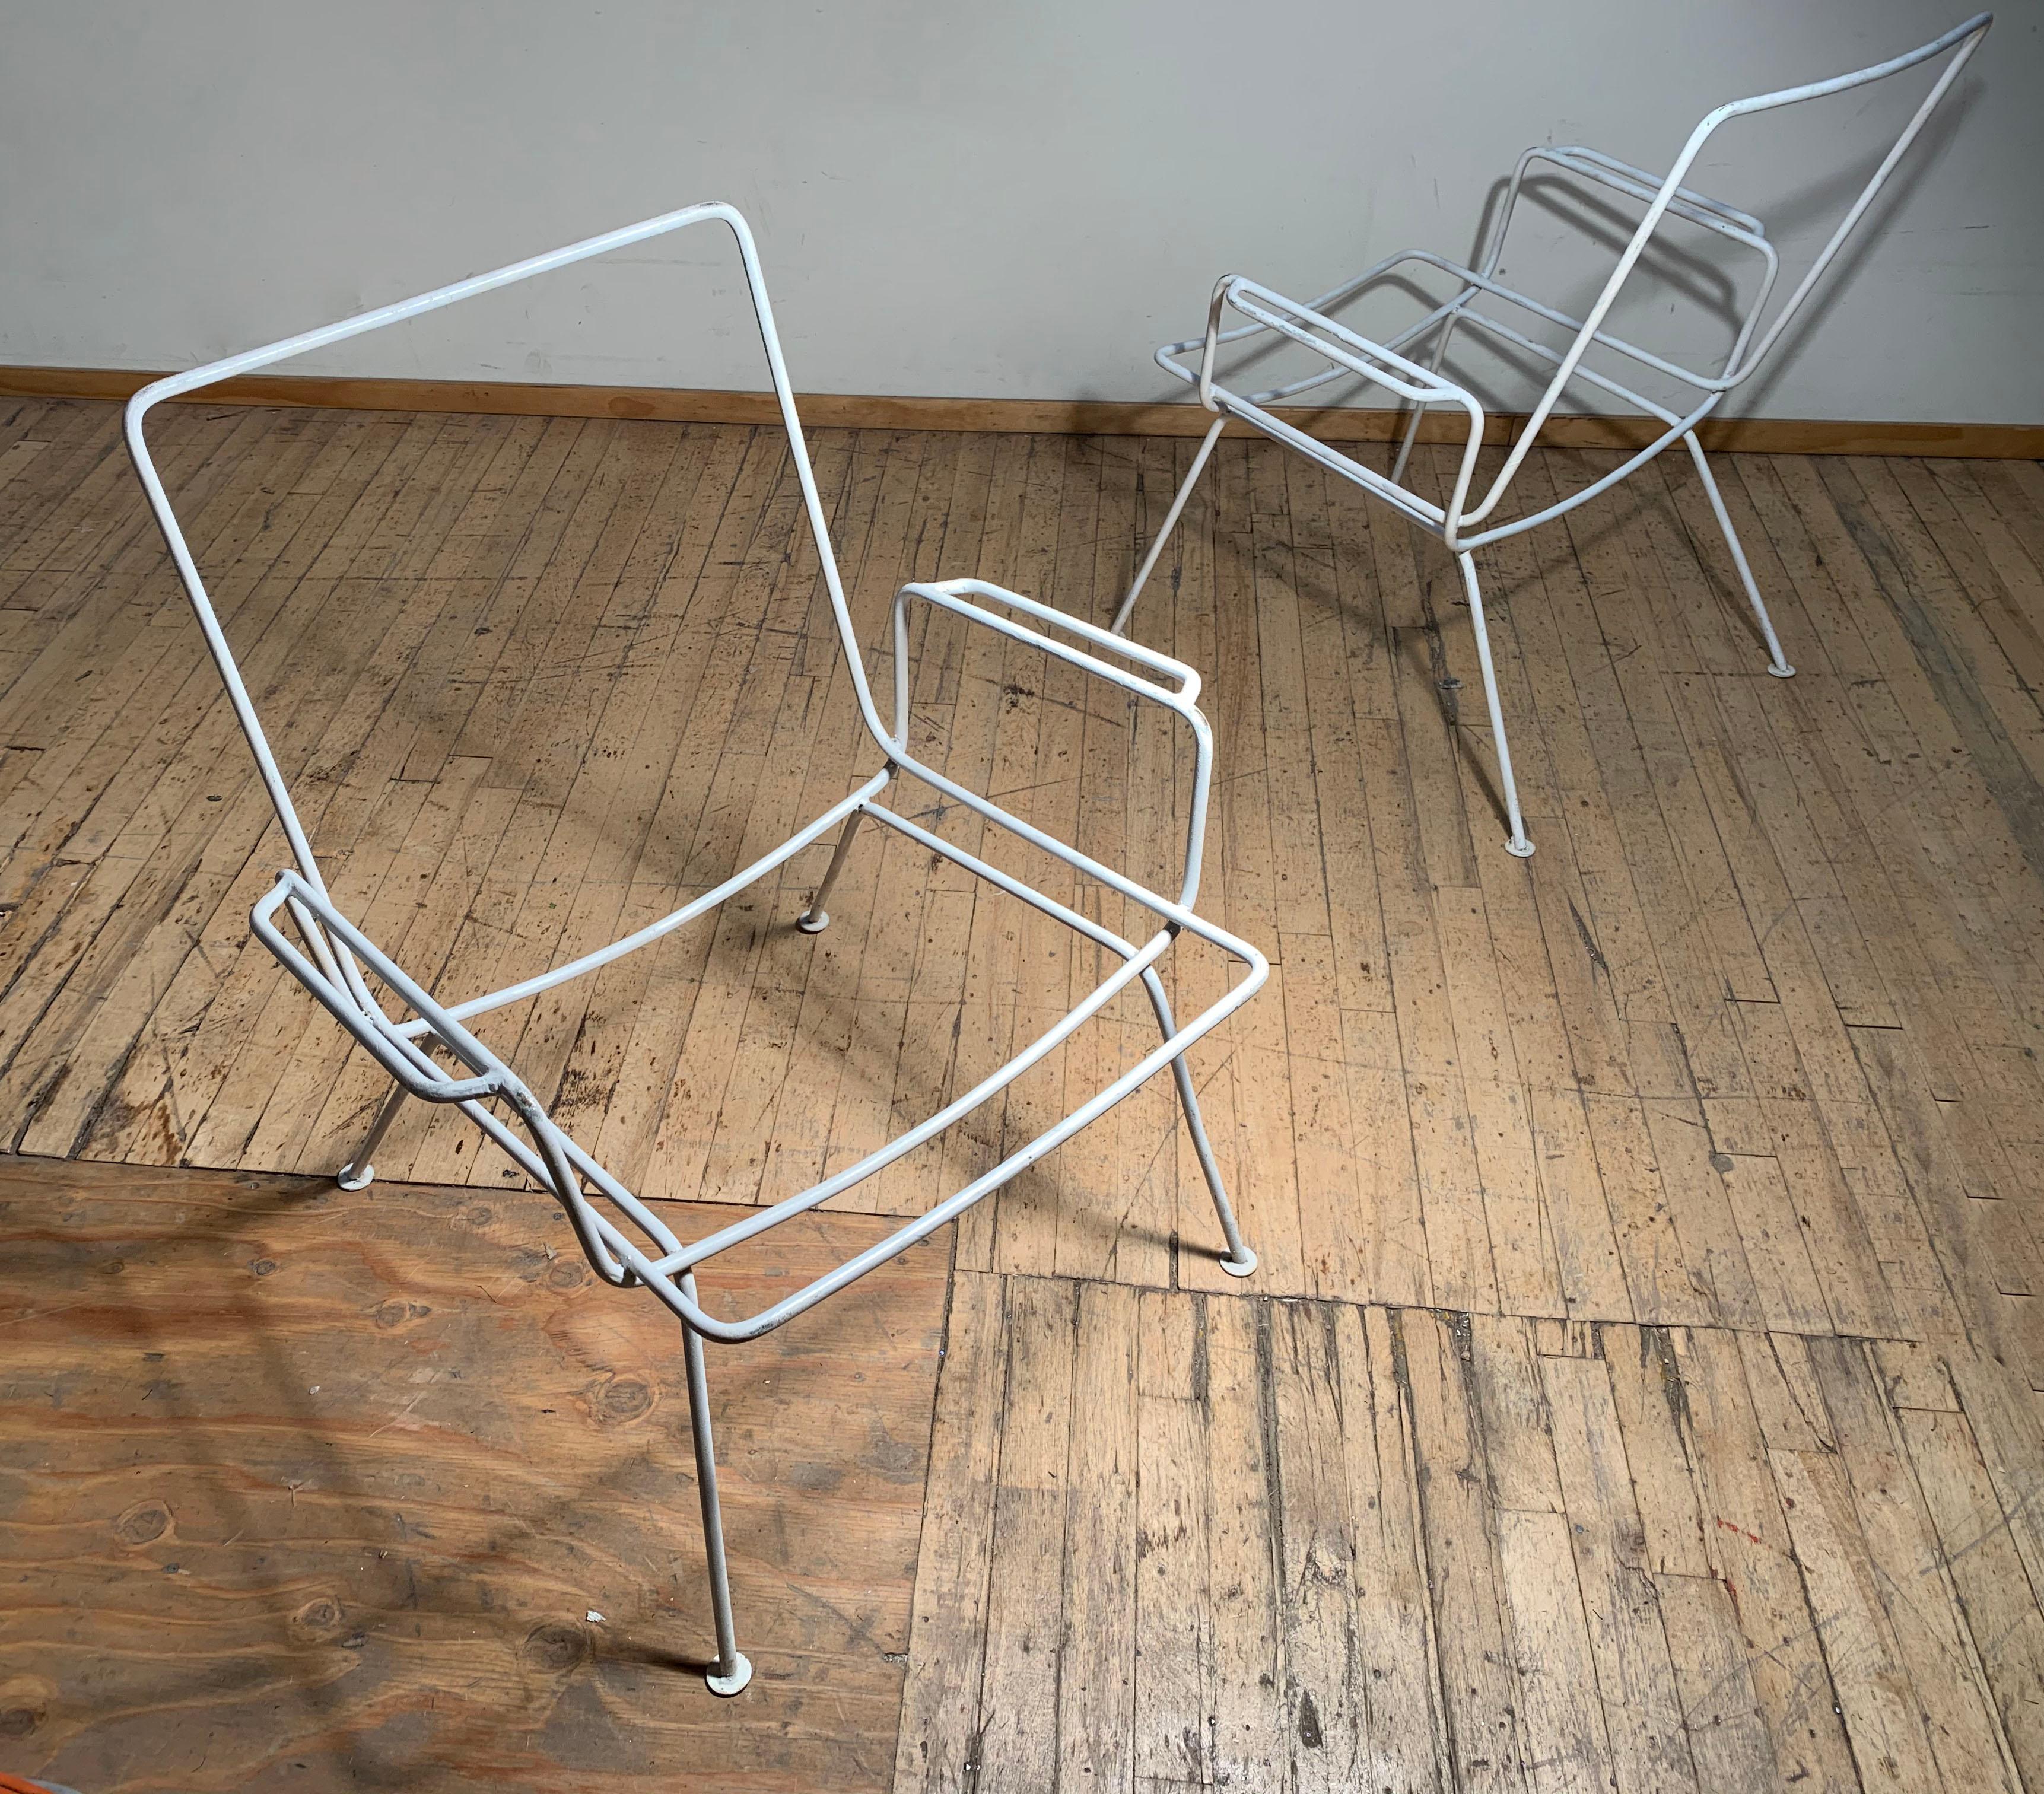 Pair of vintage midcentury wrought iron patio chairs. Most likely European. French or Italian.

Manner of Salterini, Milo Baughman, Woodard

These take a fabric sling seat.